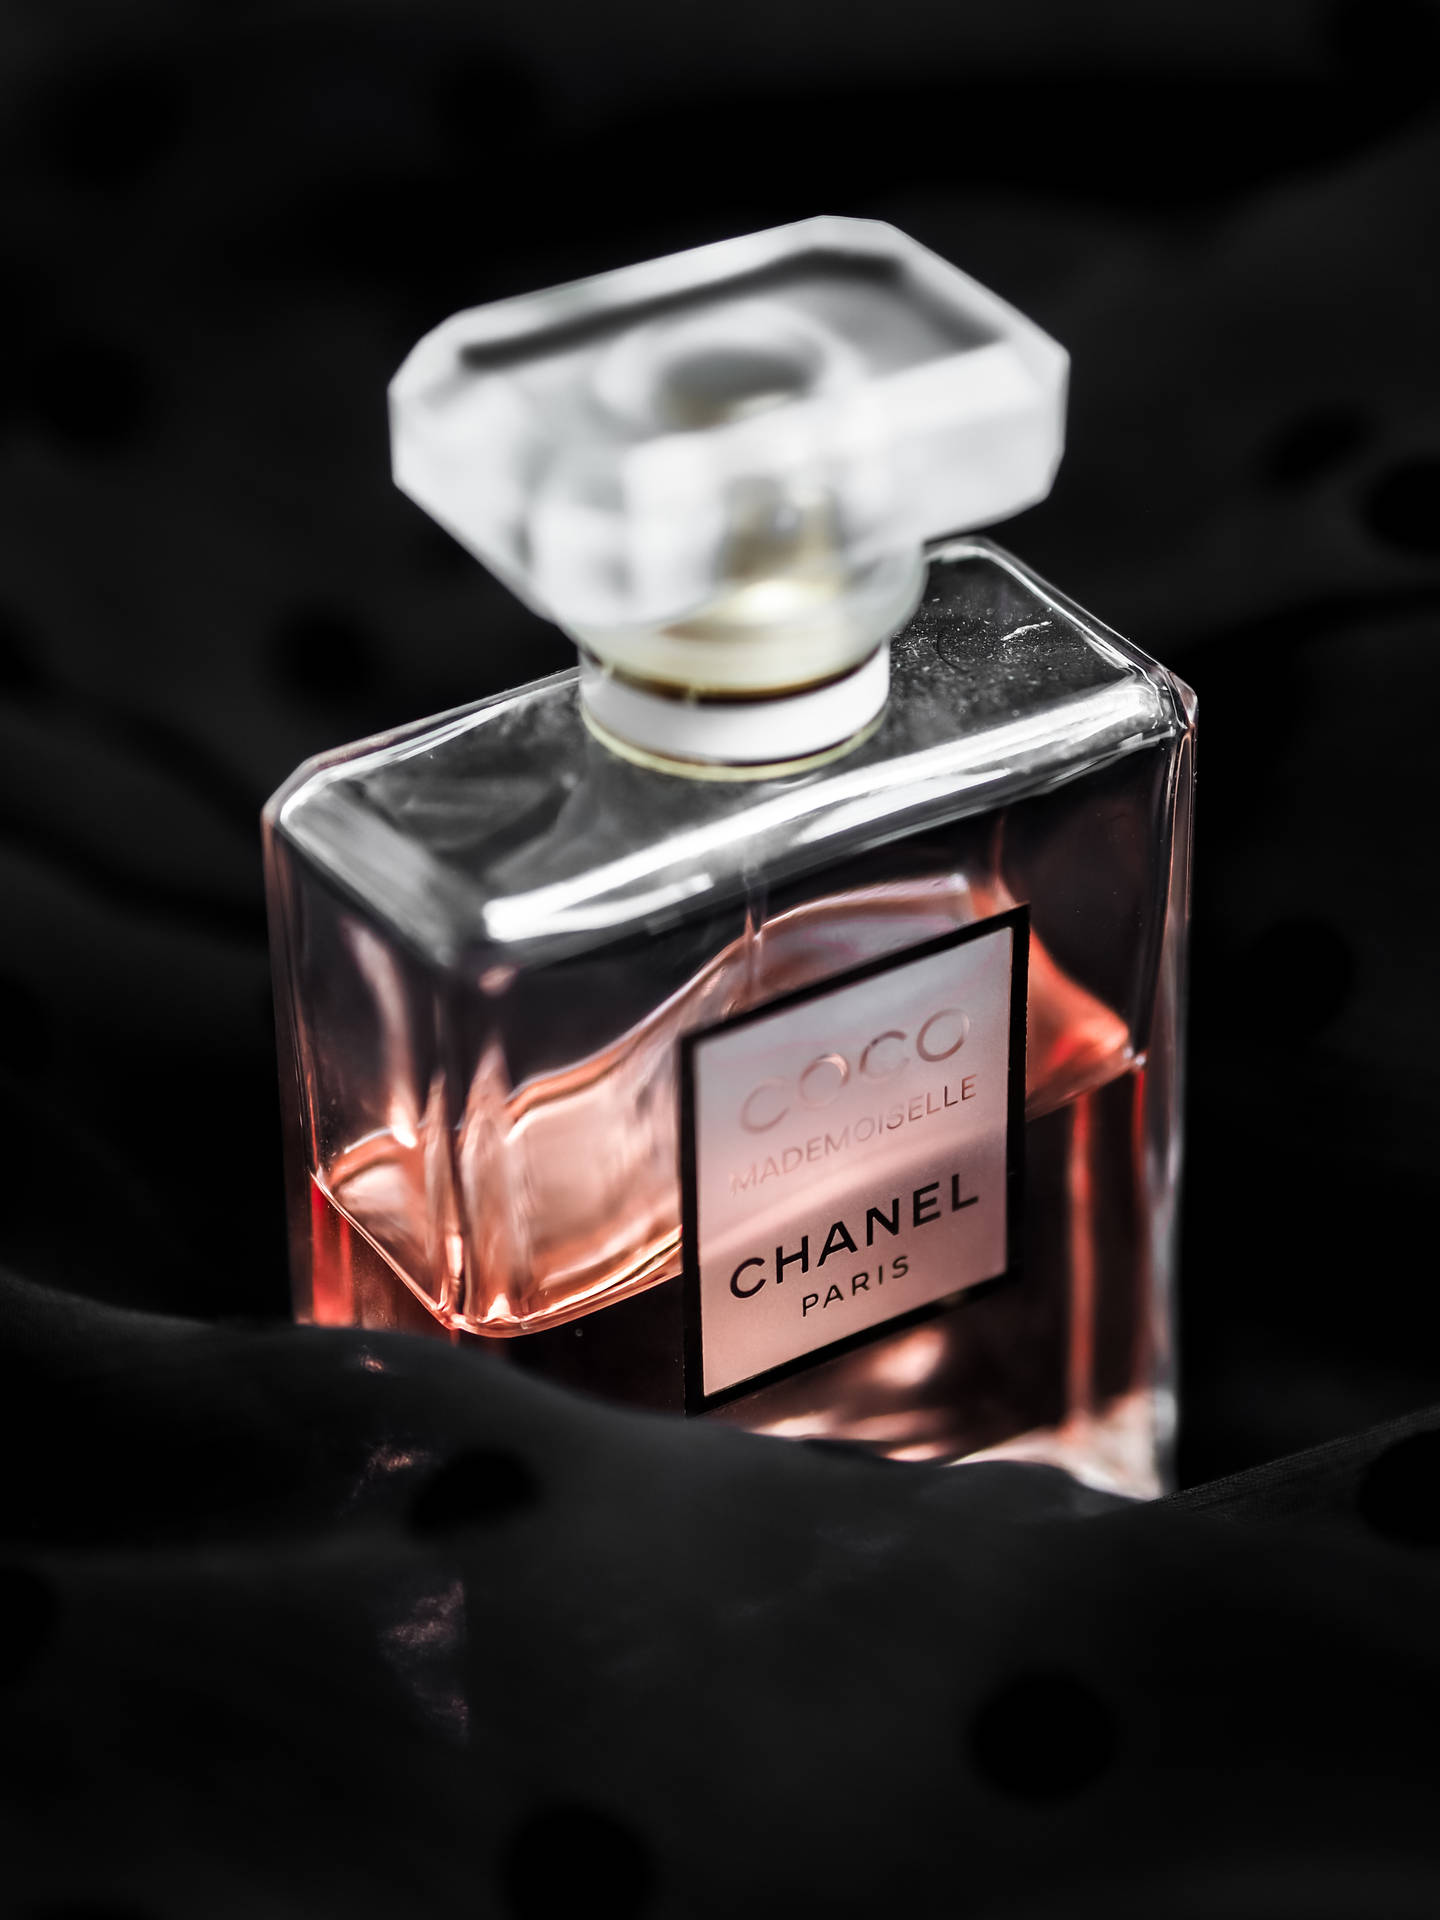 Download Chanel Coco Mademoiselle Perfume Wallpaper